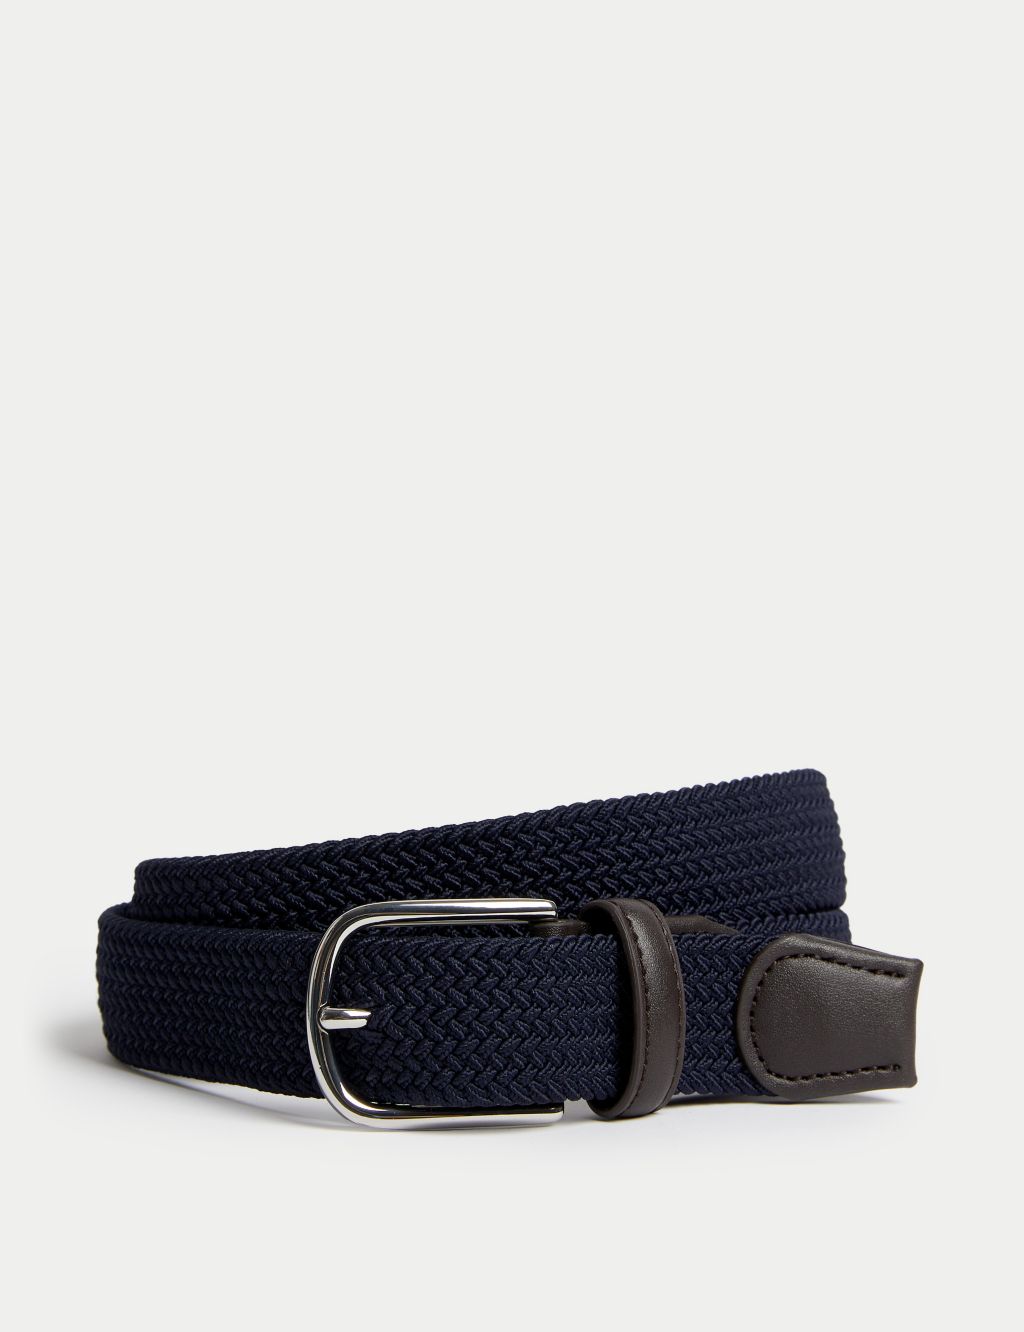 Stretch Woven Casual Belt image 1